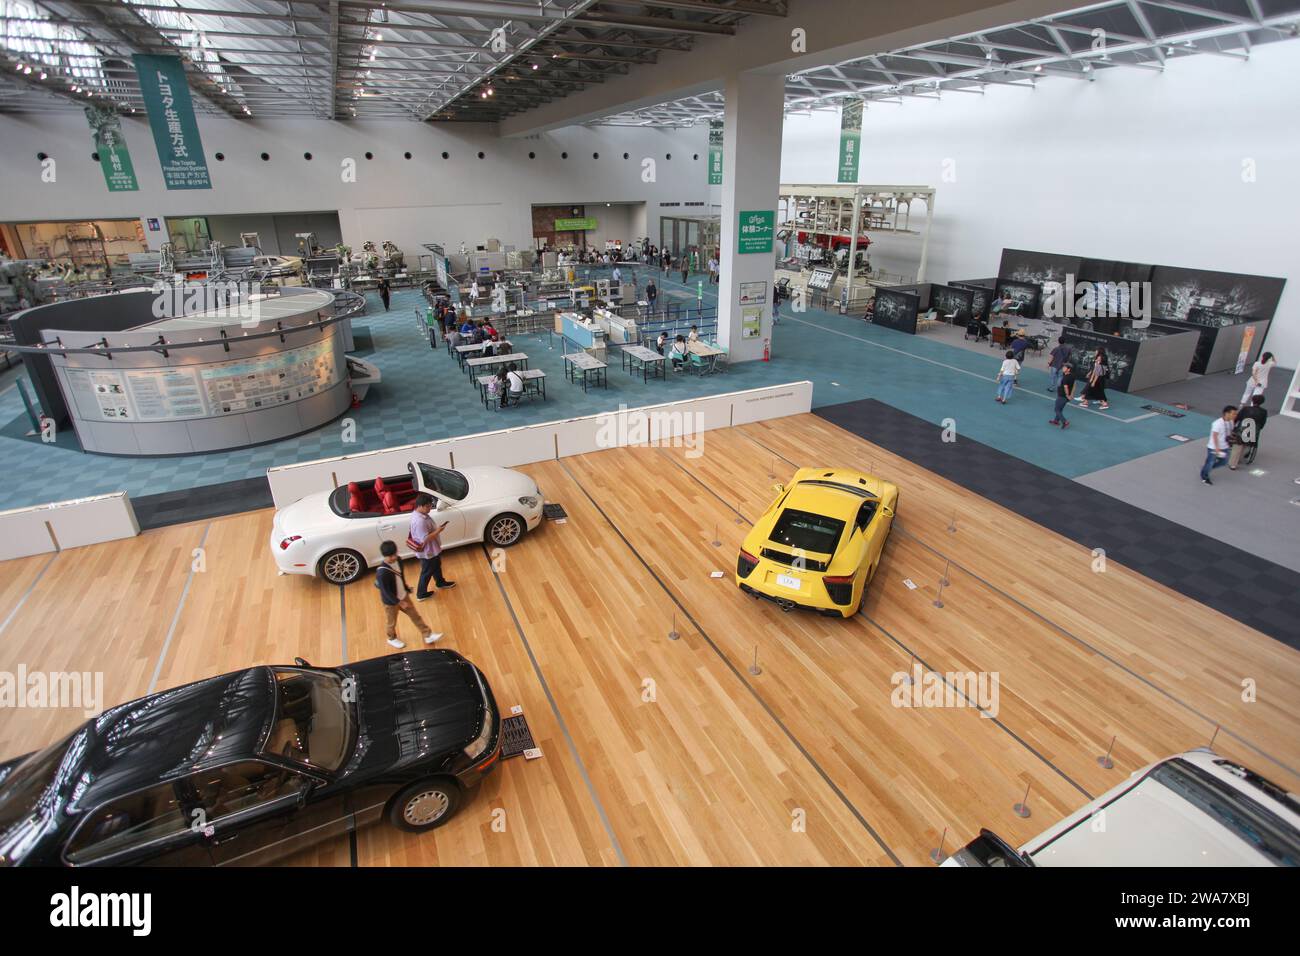 Inside the Toyota Commemorative Museum of Industry and Technology in Nagoya, Japan with a showroom of classic Toyota cars and historical machinery. Stock Photo